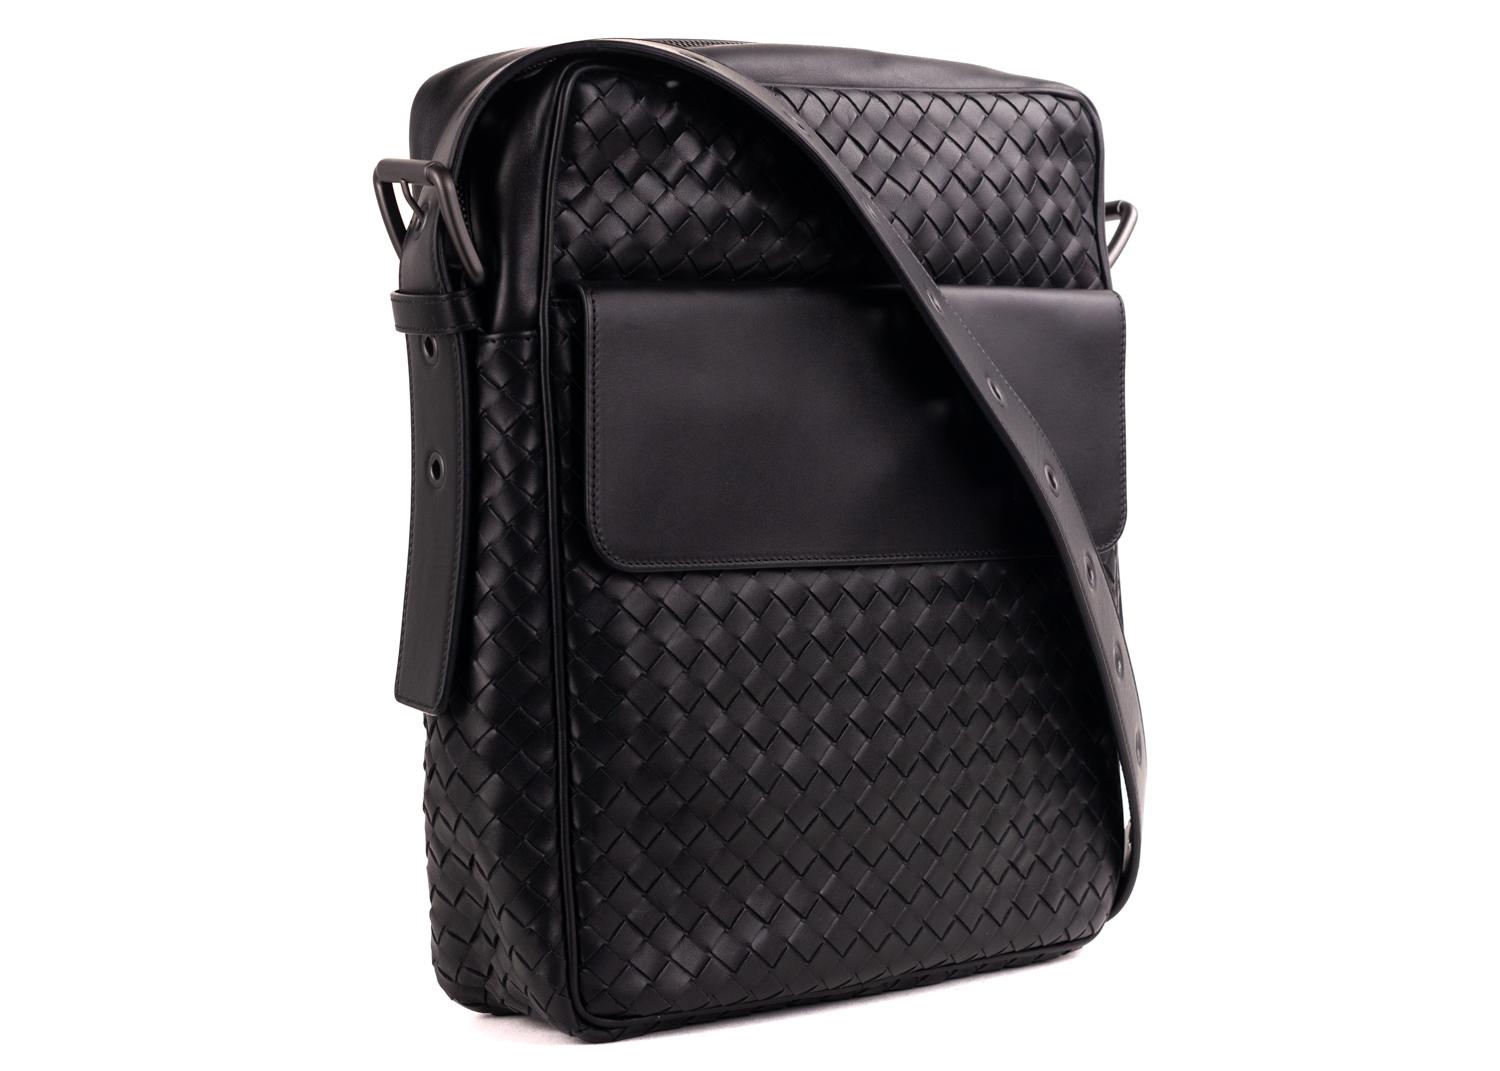 Perfect for everyday essentials this compact messenger bag is hand woven from sturdy VN calf leather ensuring it will continue to look impeccable over time. The all leather shoulder bag can be adjusted so the bag fits comfortably cross body or